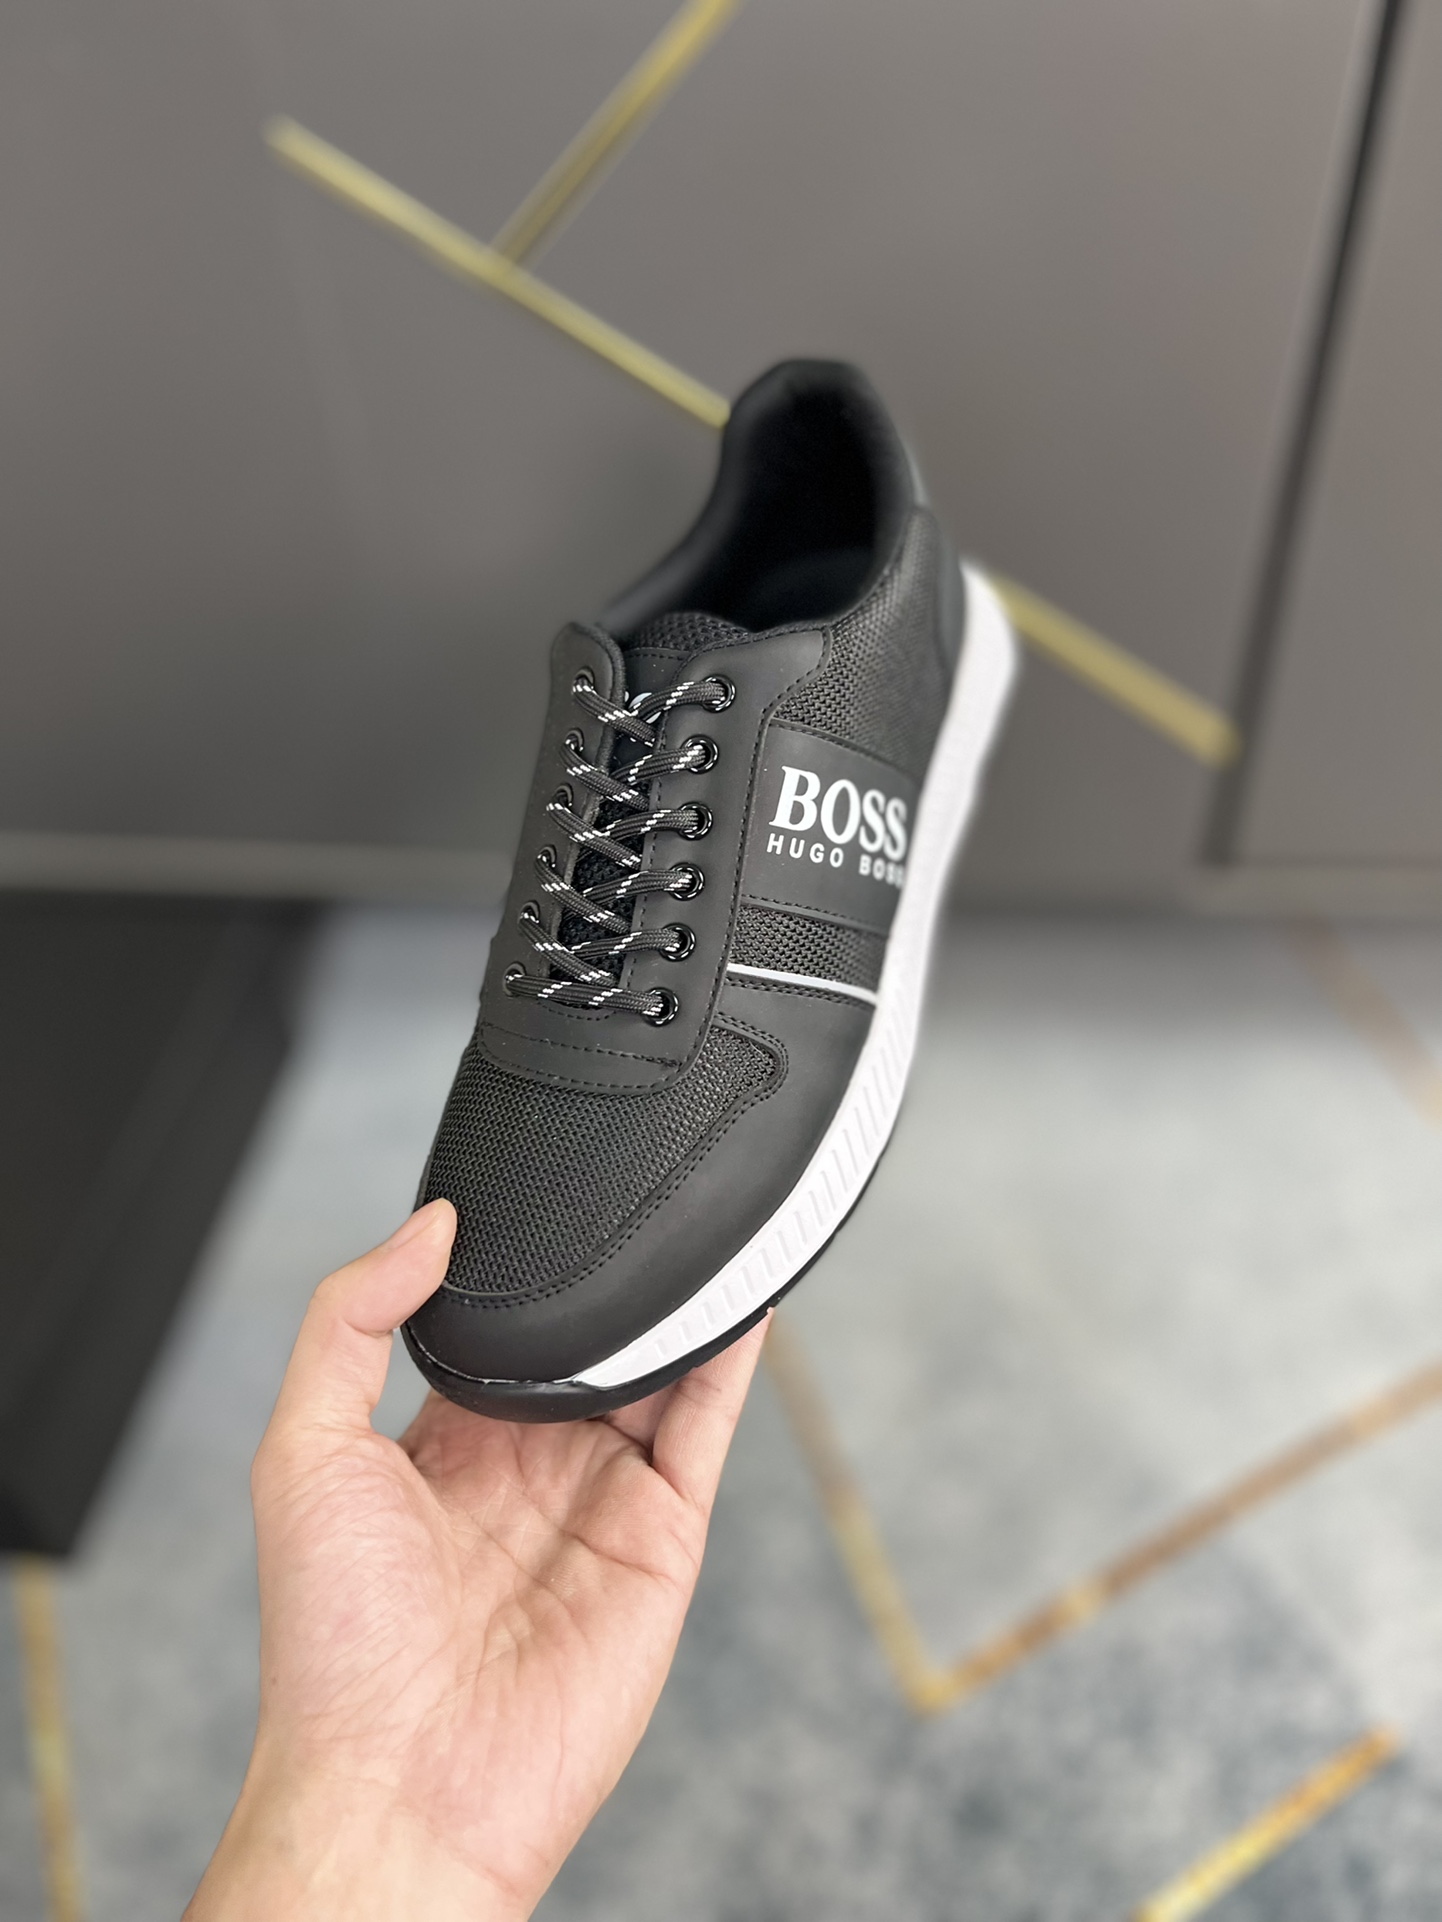 :❤️❤️❤️【BOSS】Sports men's shoes have become a never-ending fashion darling with their classic design